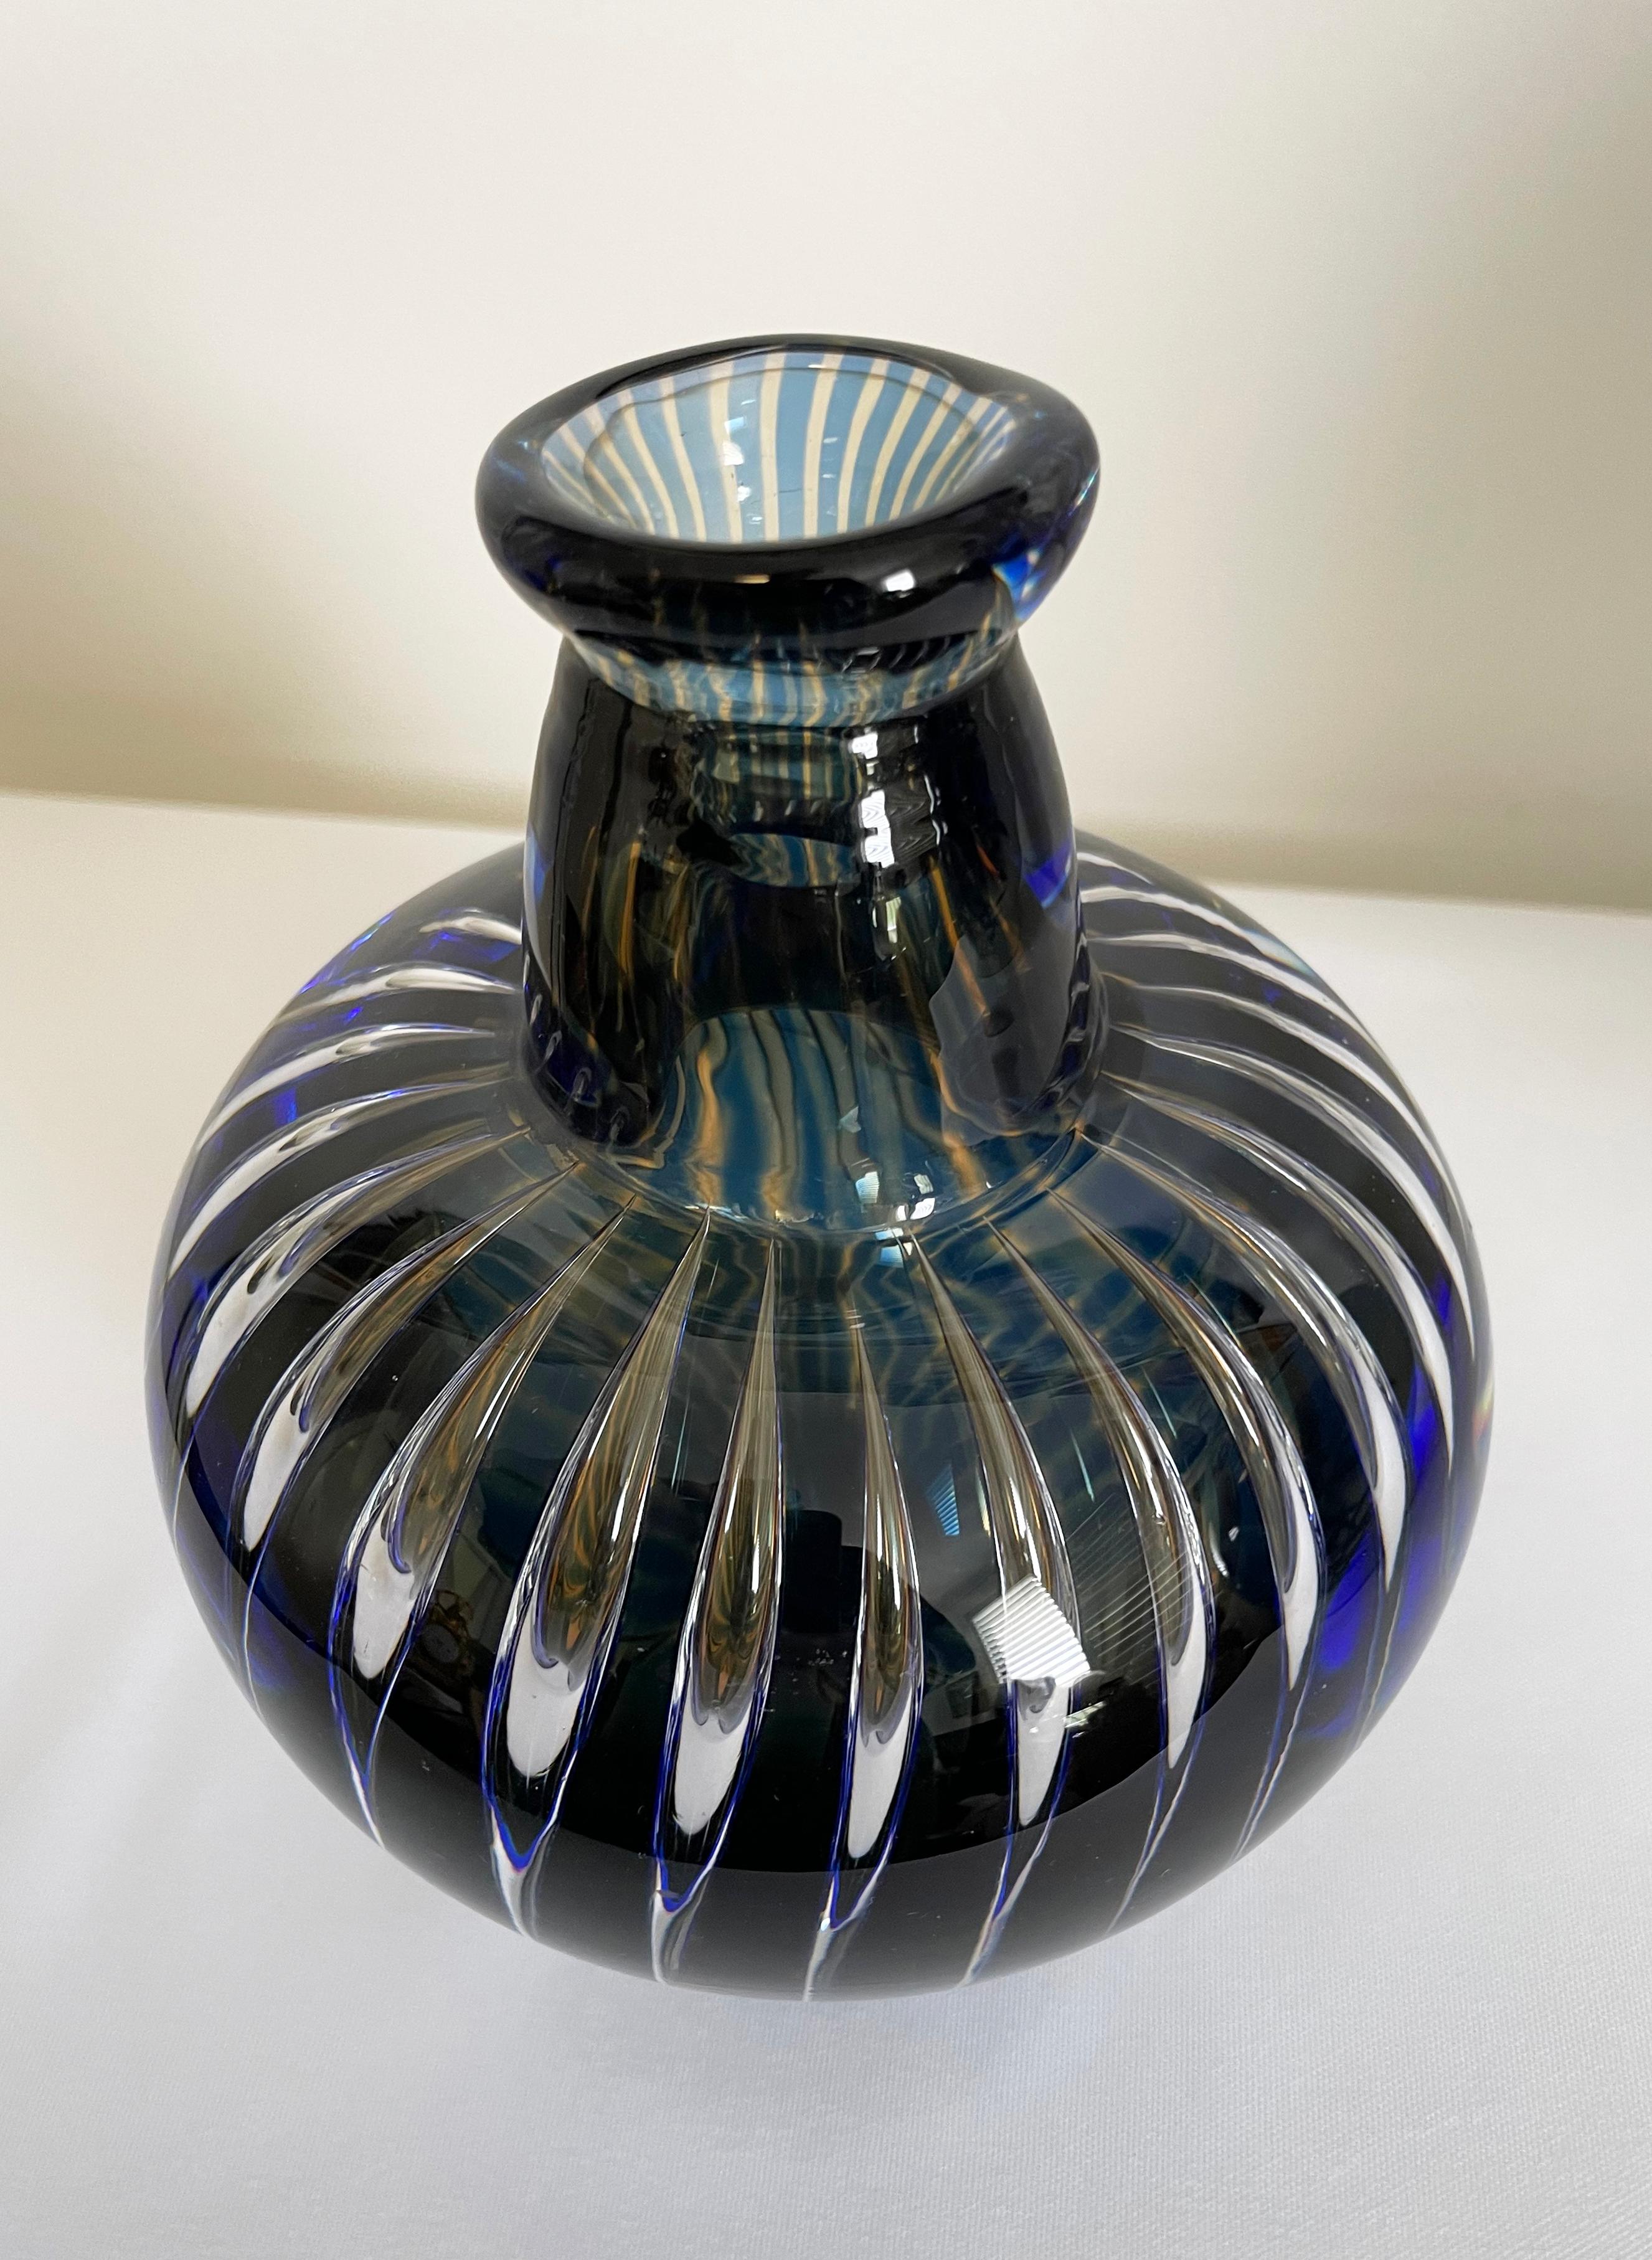 20th Century Orrefors Ariel Vase By Edvin Ohrstrom, Circa 1950 For Sale